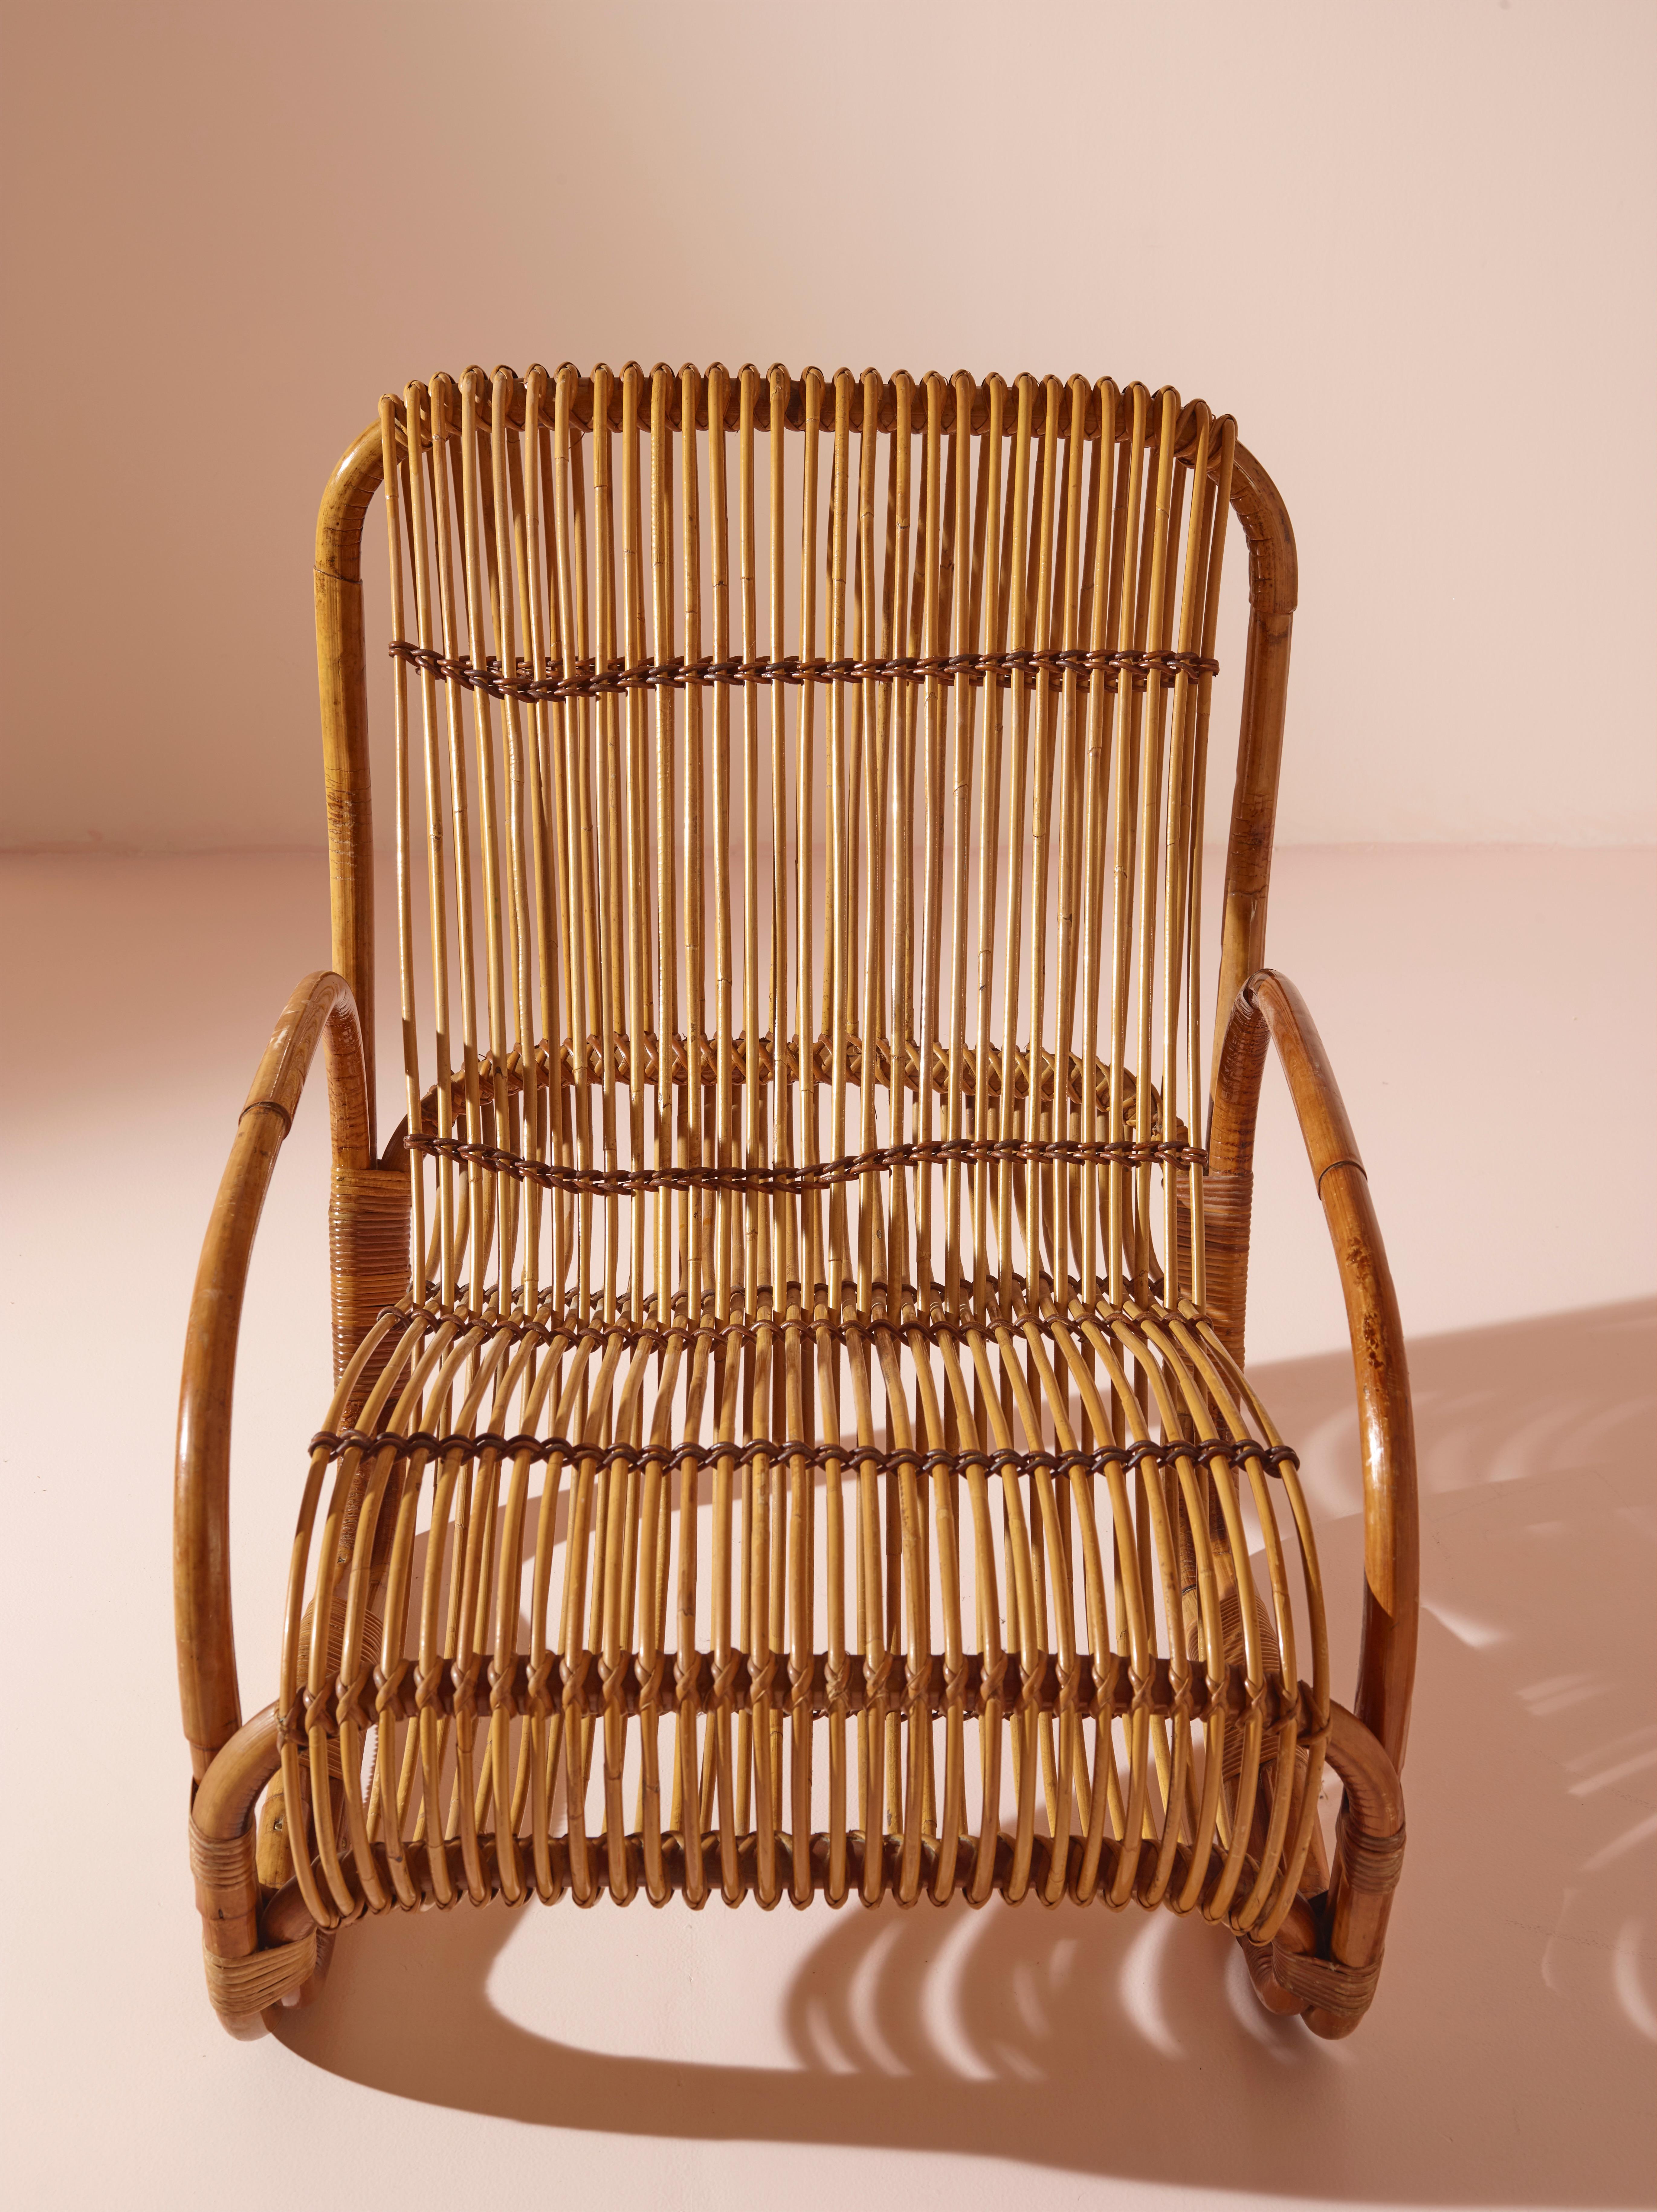 Mid-20th Century Raffaella Crespi attributed bamboo lounge chair, Italy, 1960s For Sale